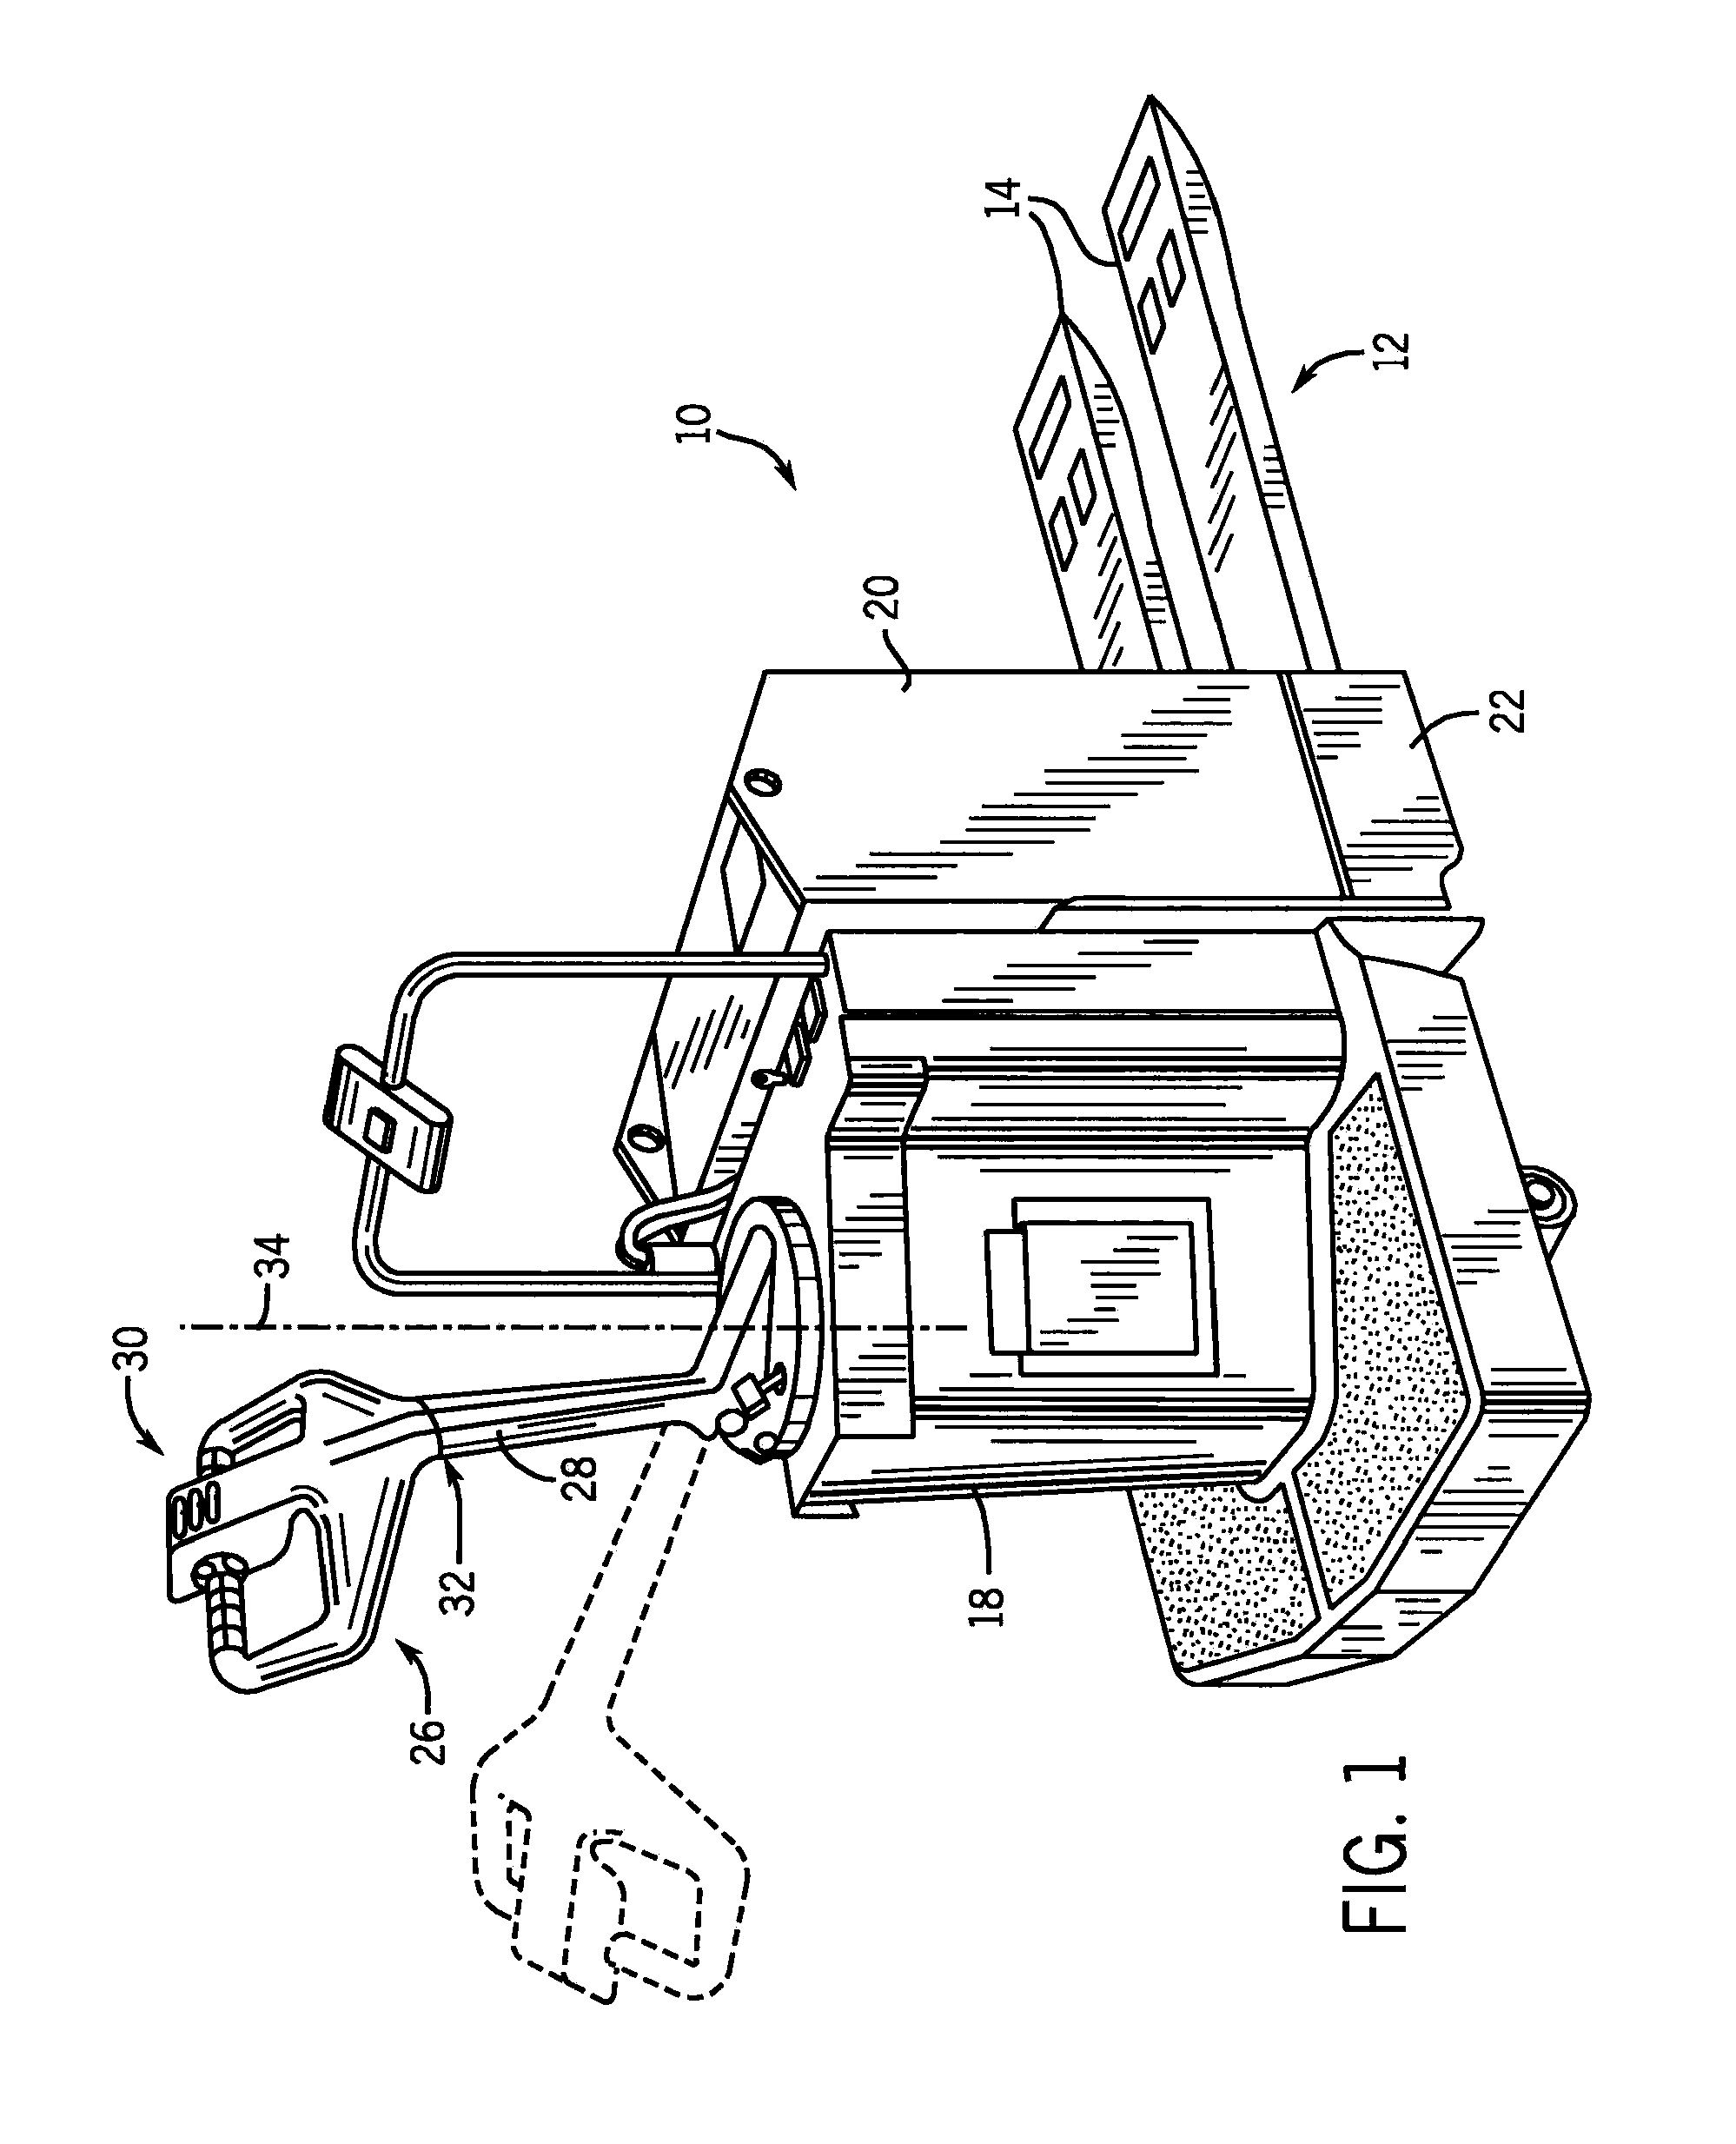 Self-centering, torque-sensing joint assembly for a pallet truck power steering system